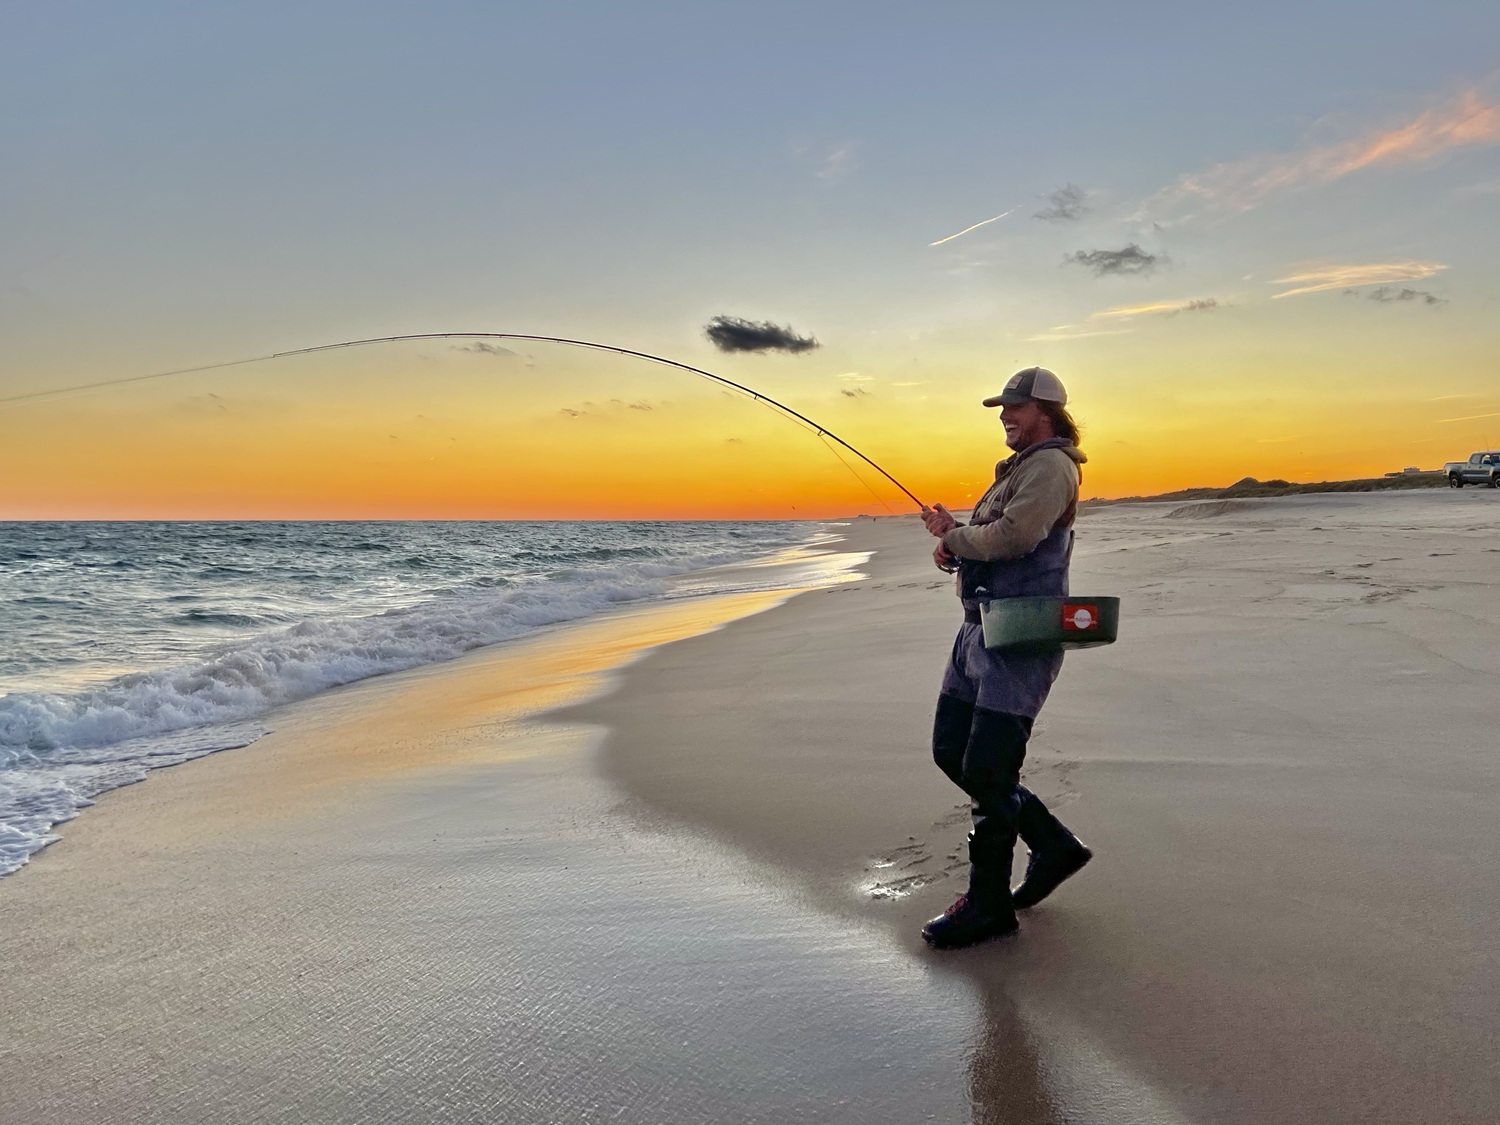 Tim Regan is a Bridgehampton resident and avid surf fisherman whose drone photos and videos of marine life off Long Island's shores on his instagram page @southforksalt has sparked interest (and a bevy of Instagram copycats) in the explosion of life just behind the surf in summertime.